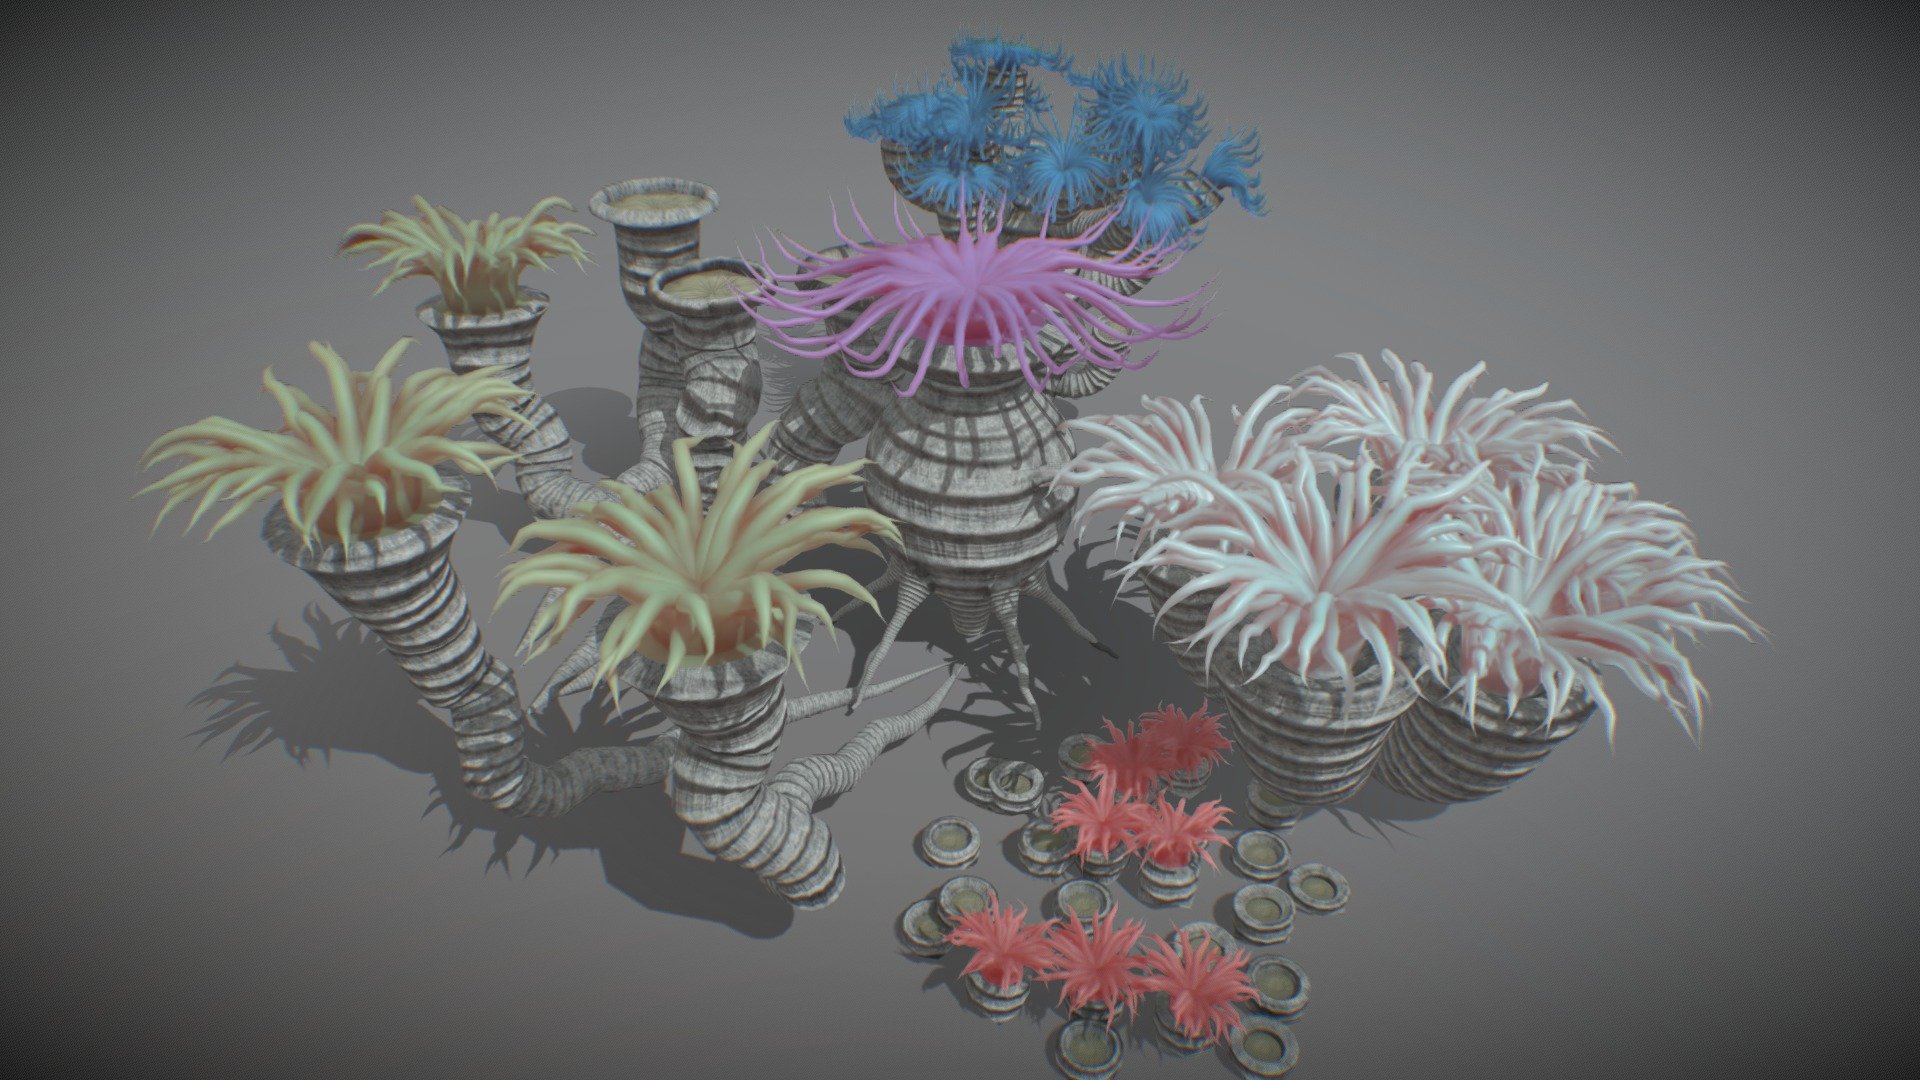 I tried to ad some improvements my old rugose corals
It's inspired by &ldquo;Tetracorallia